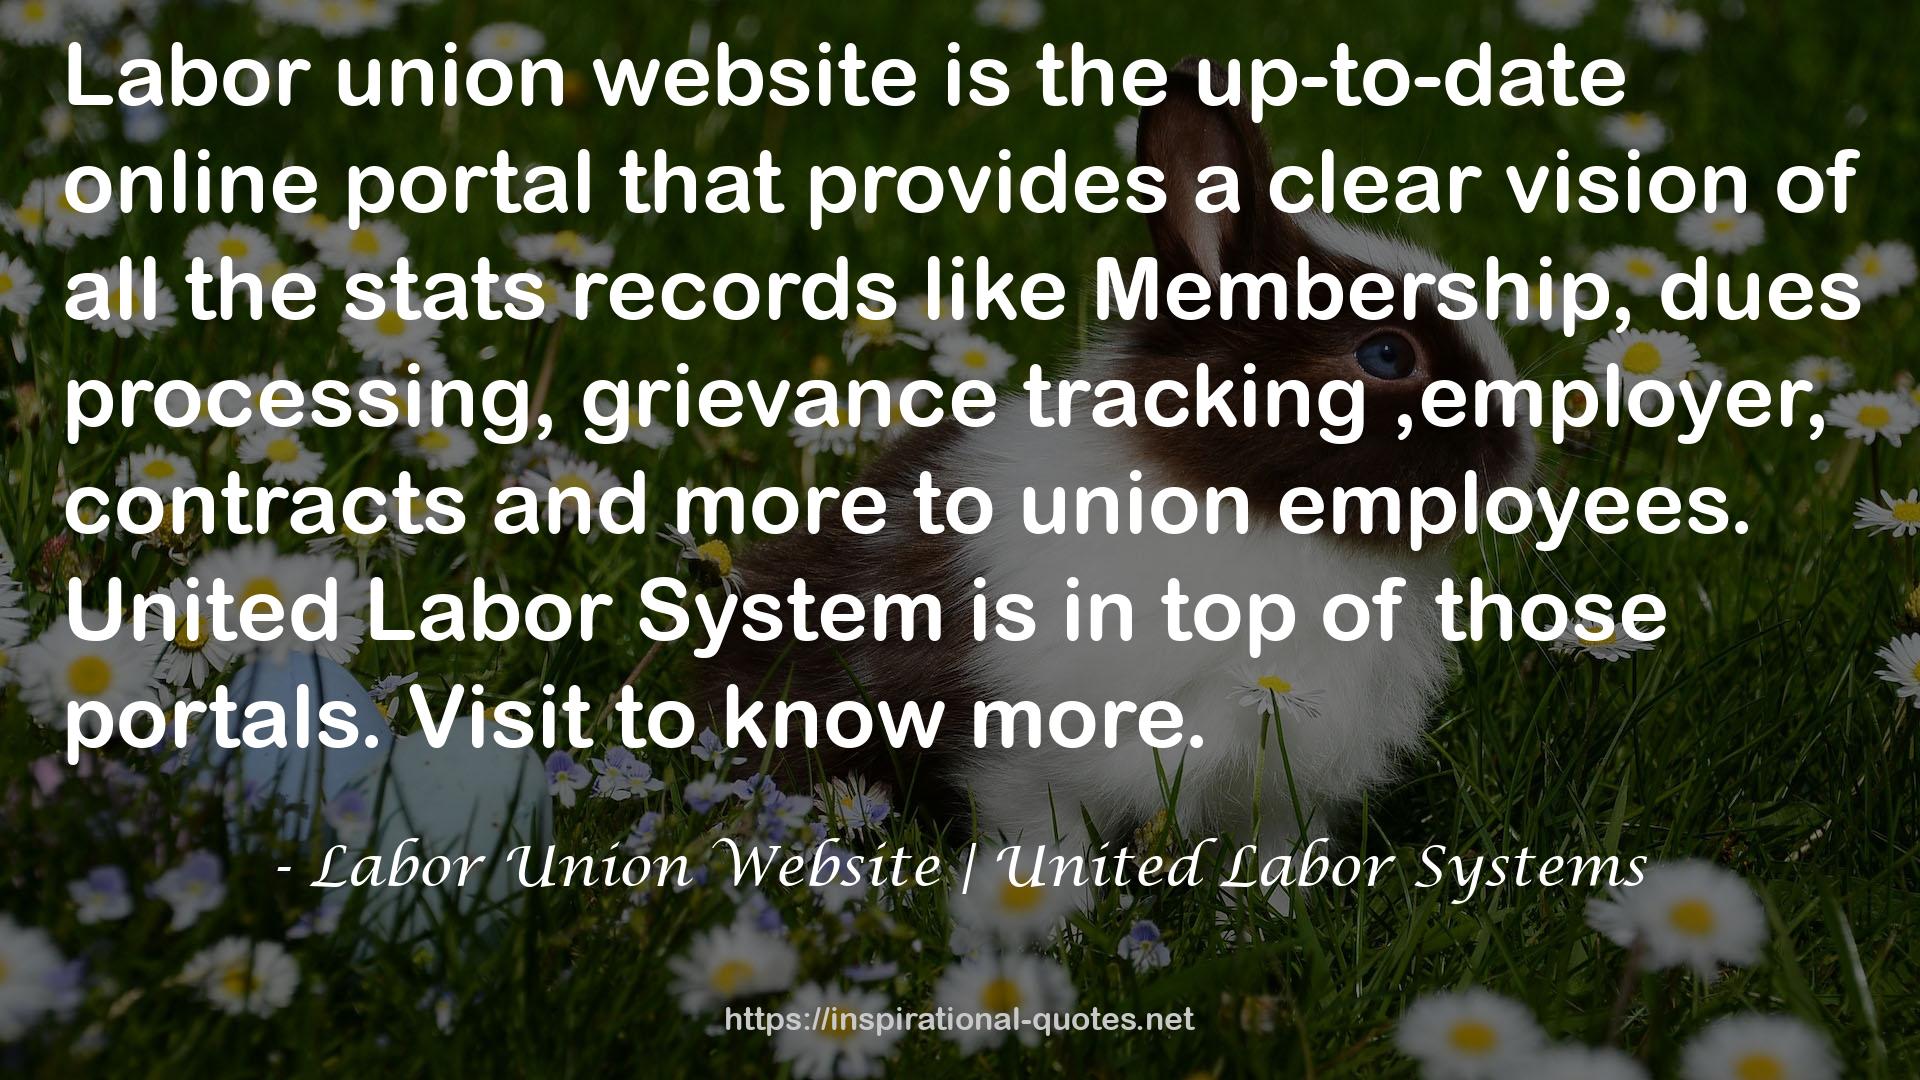 Labor Union Website | United Labor Systems QUOTES